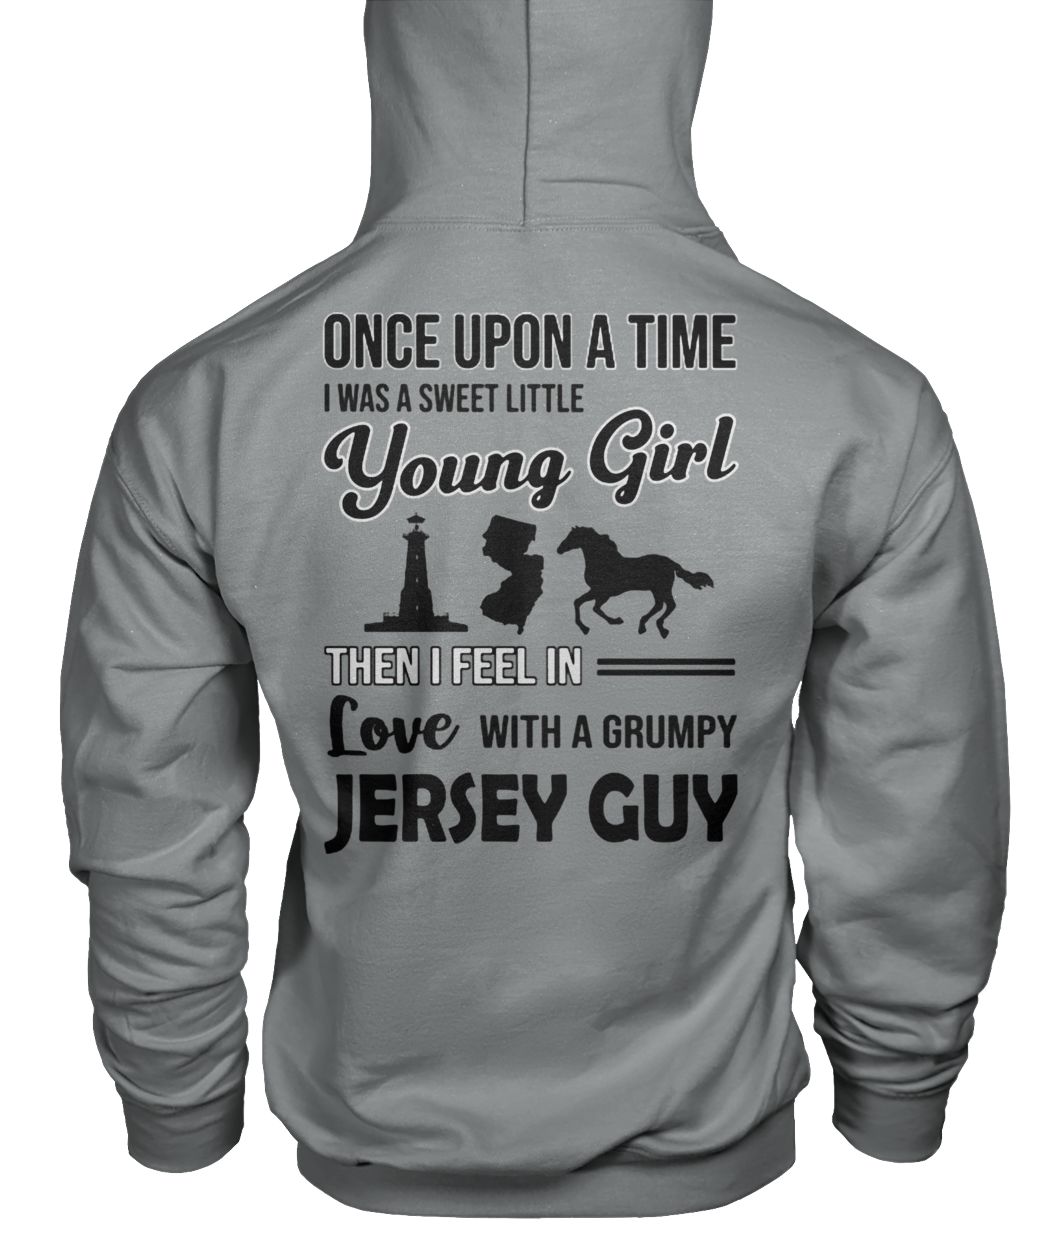 Once upon a time I was a sweet little young girl then I feel in love with a grumpy jersey guy gildan hoodie